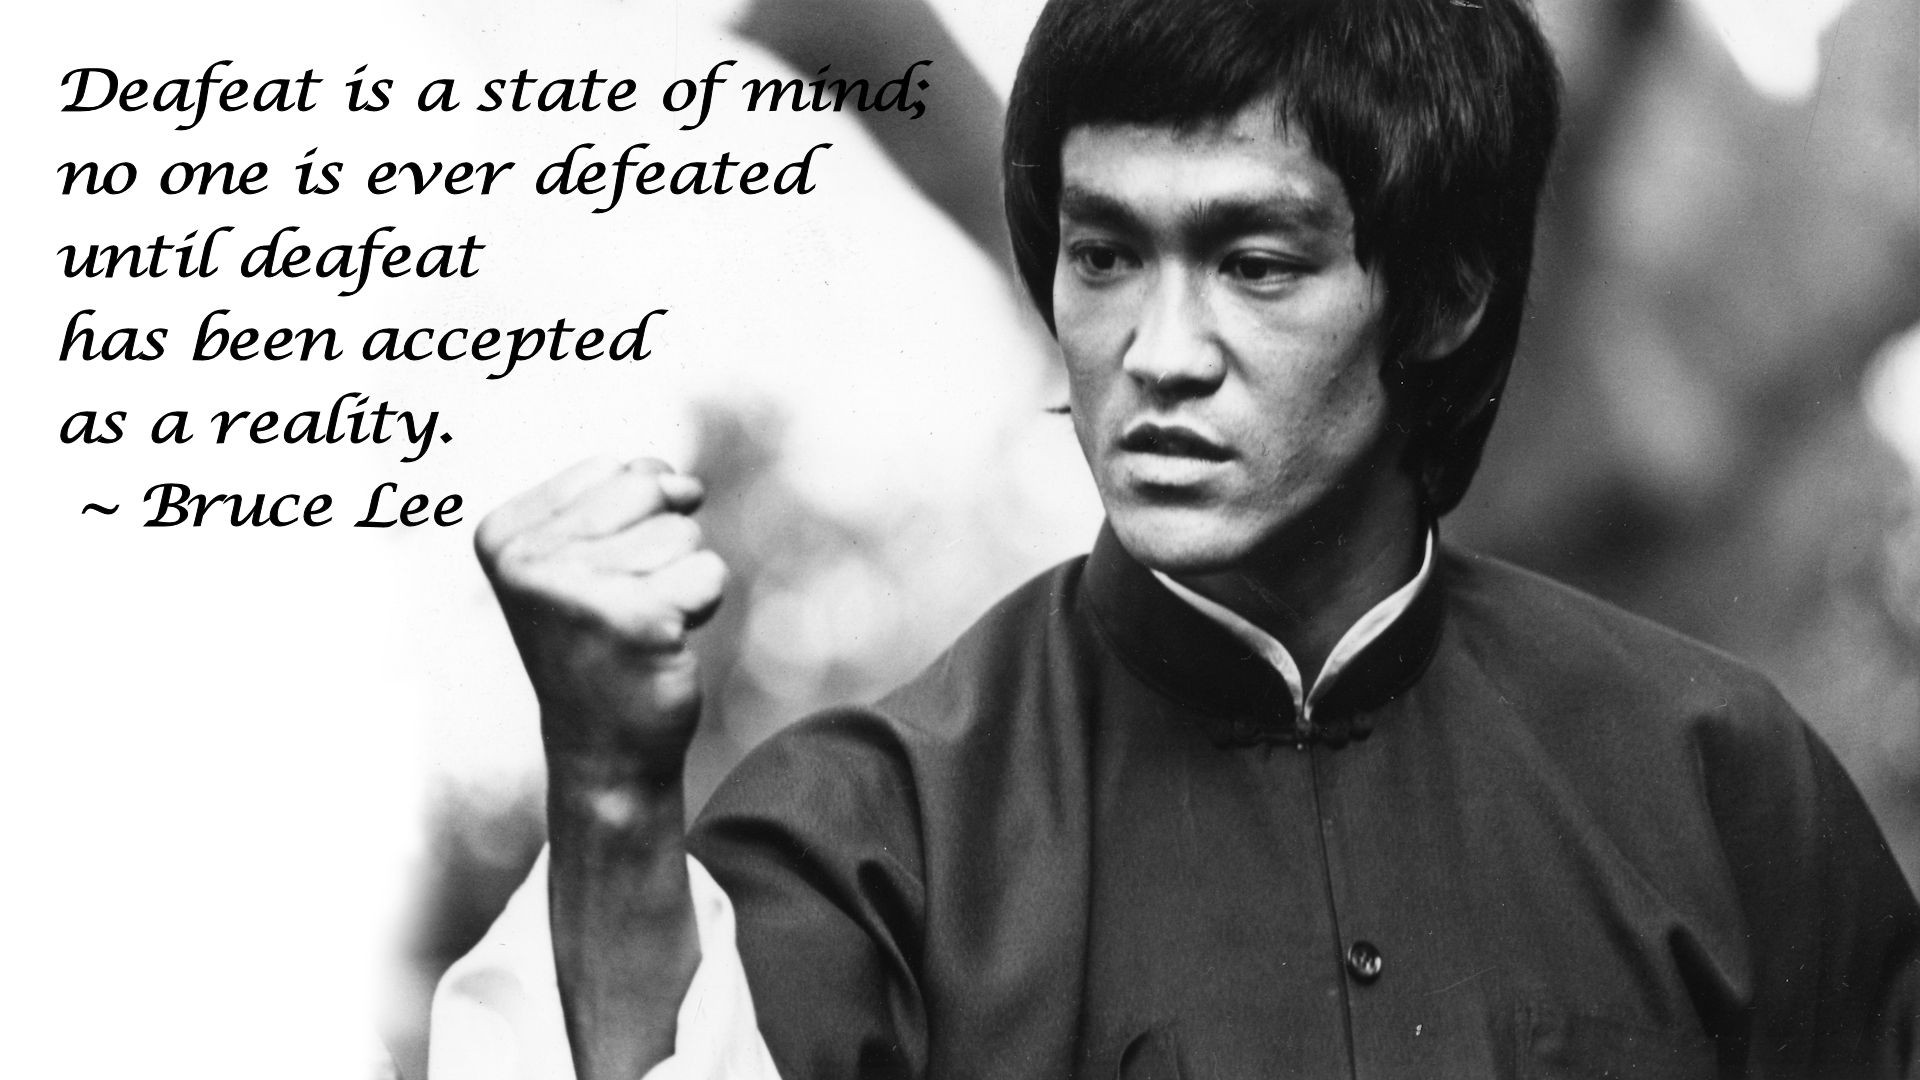 Bruce Lee BW Defeat martial art text quotes black white wallpaper